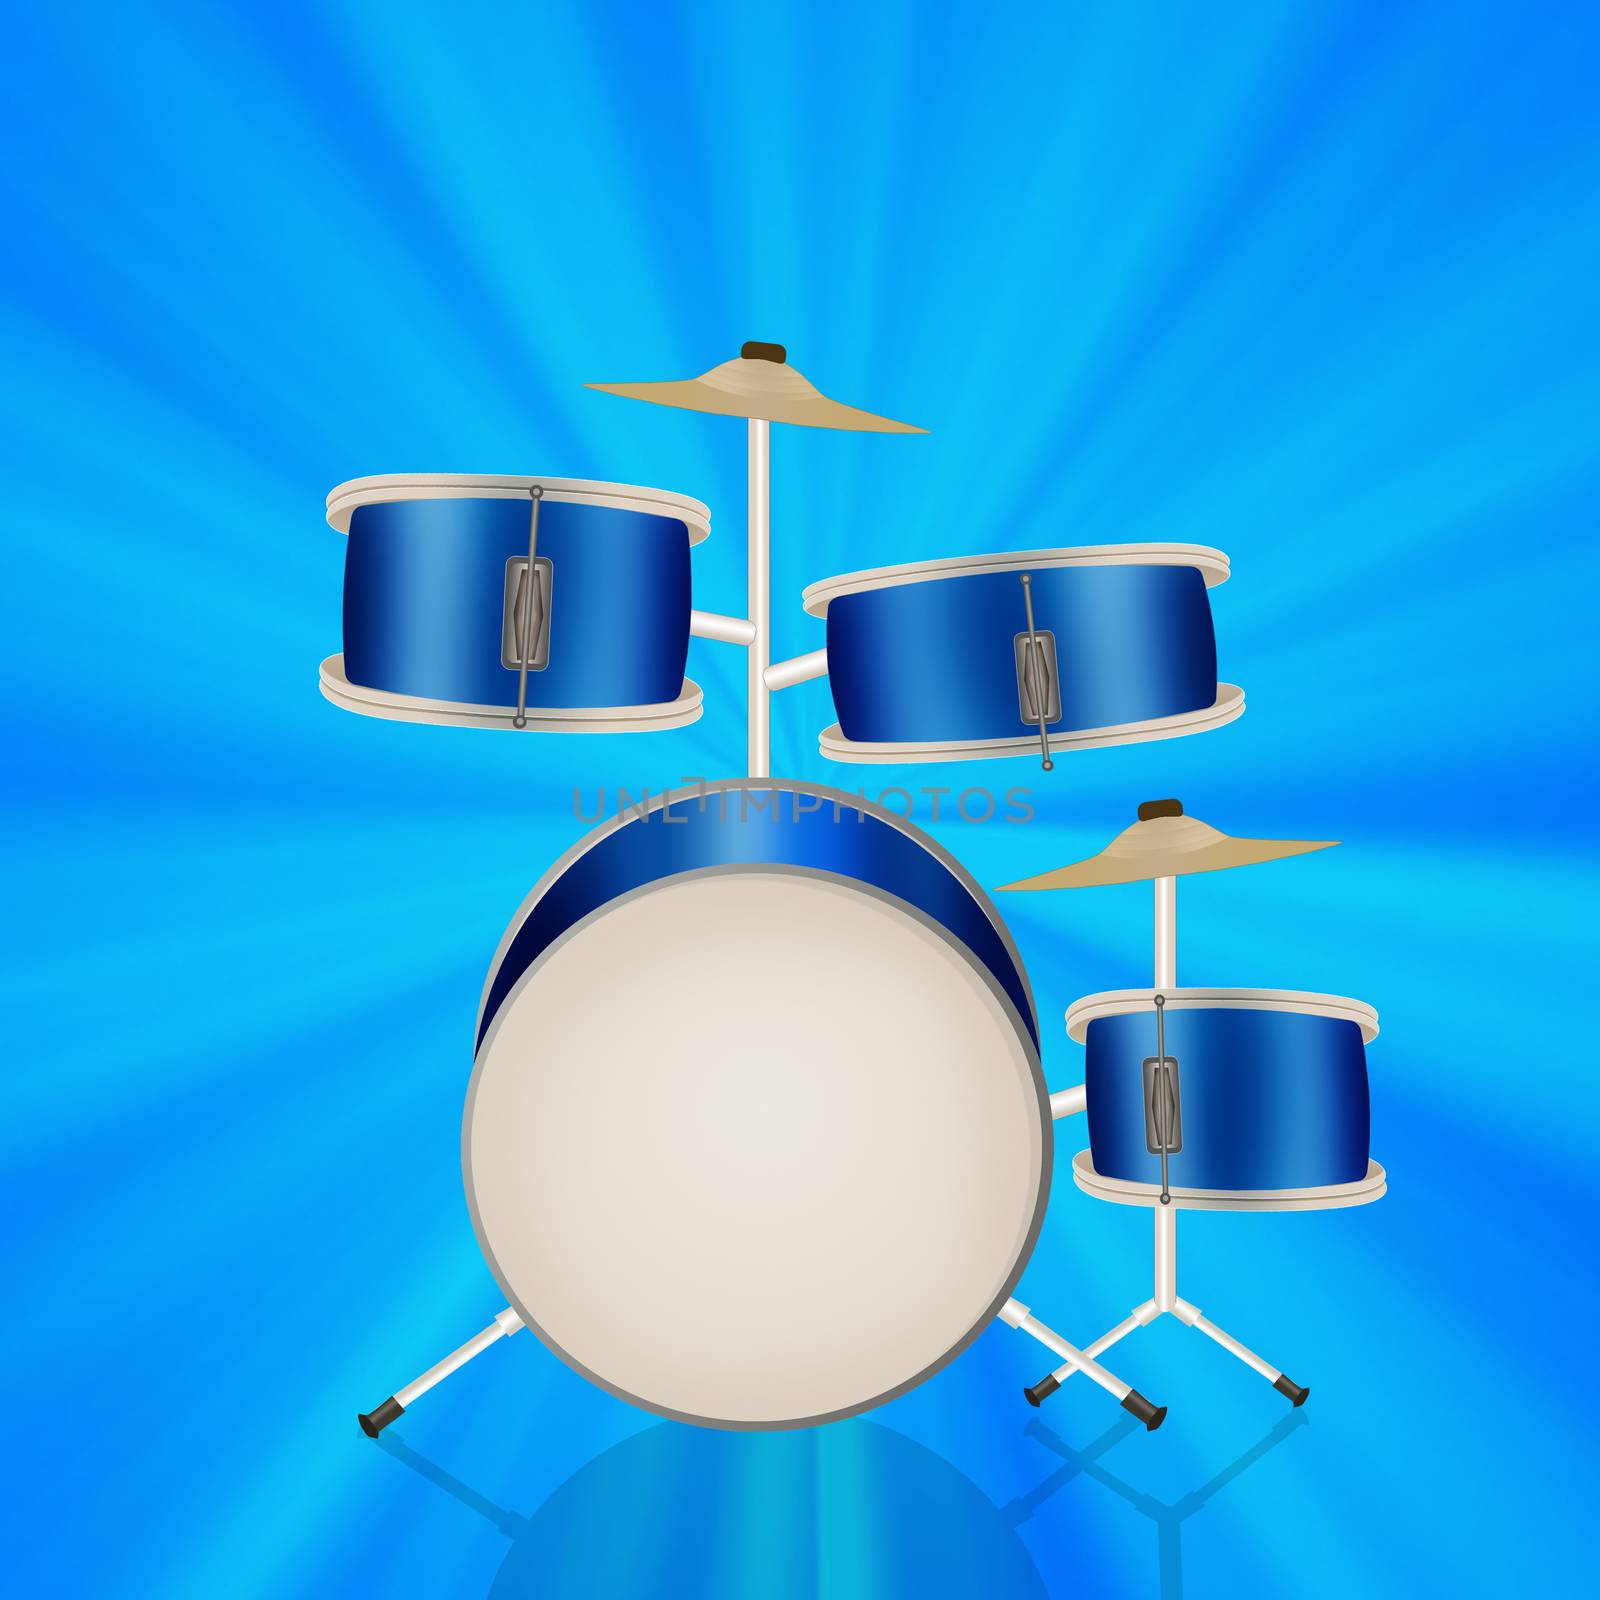 play drums by adrenalina